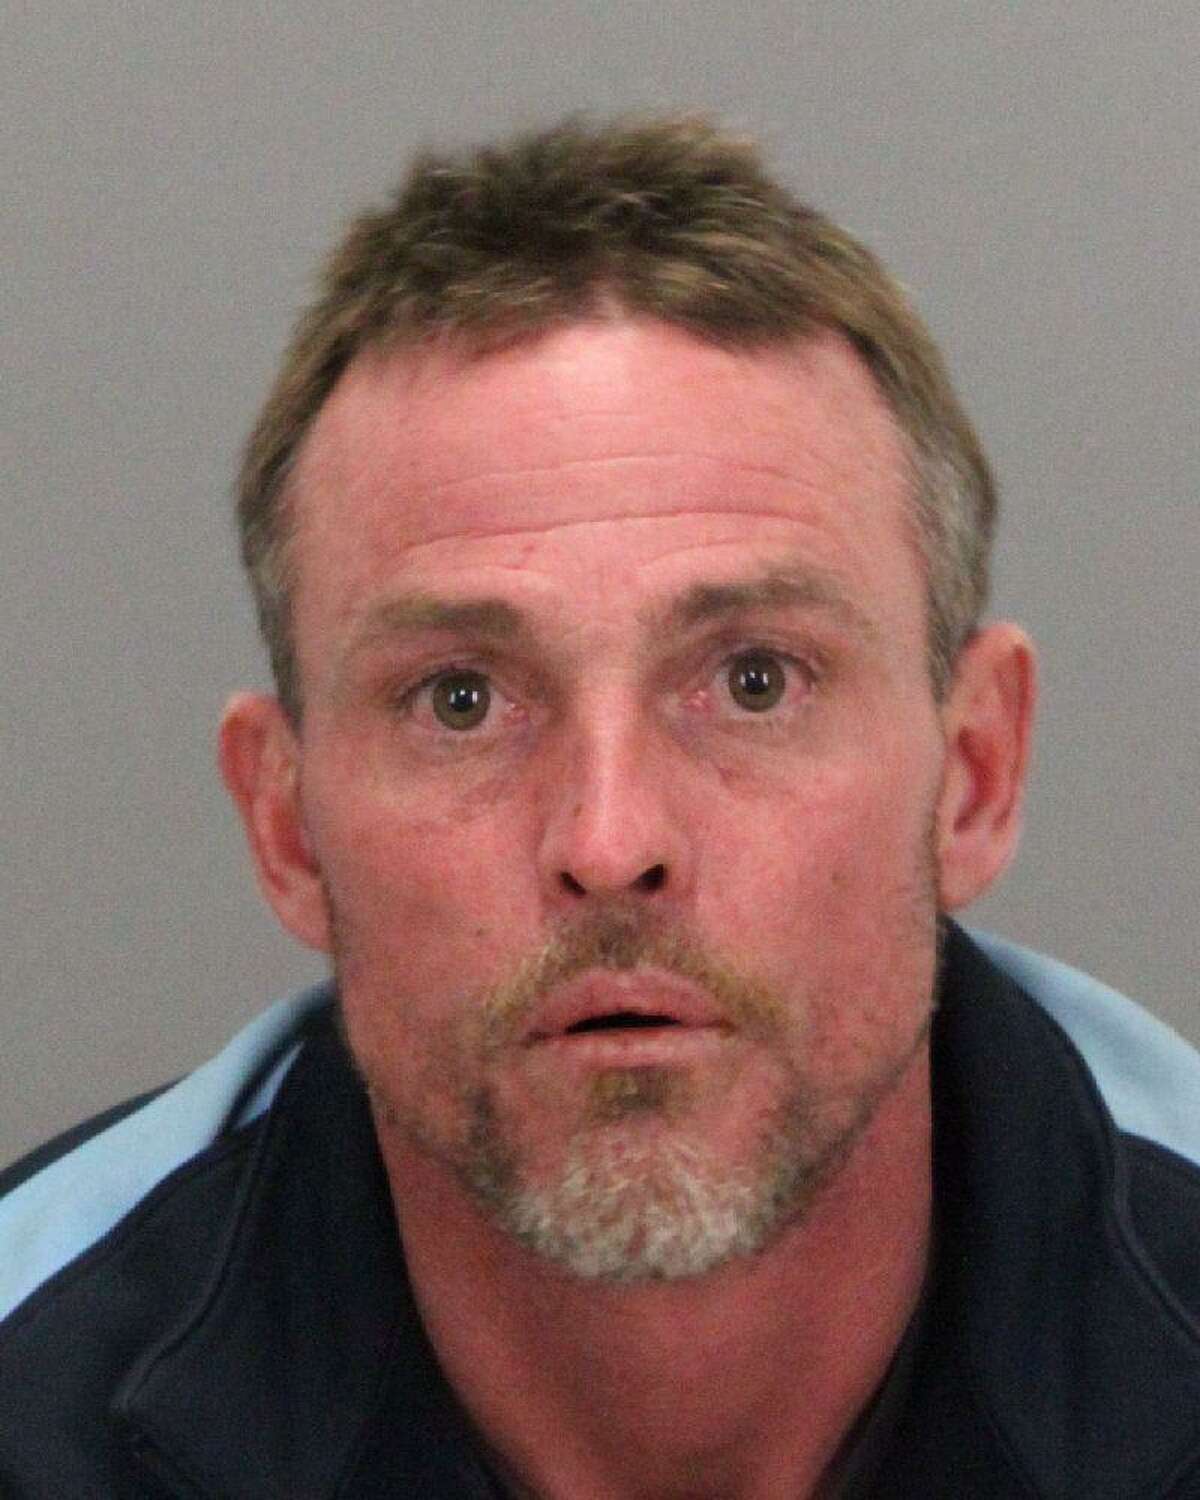 Jerry Hyde, a 38-year-old transient, was arrested early Thursday, after allegedly breaching security by trespassing onto a restricted airfield at the Mineta San Jose International Airport, officials said.